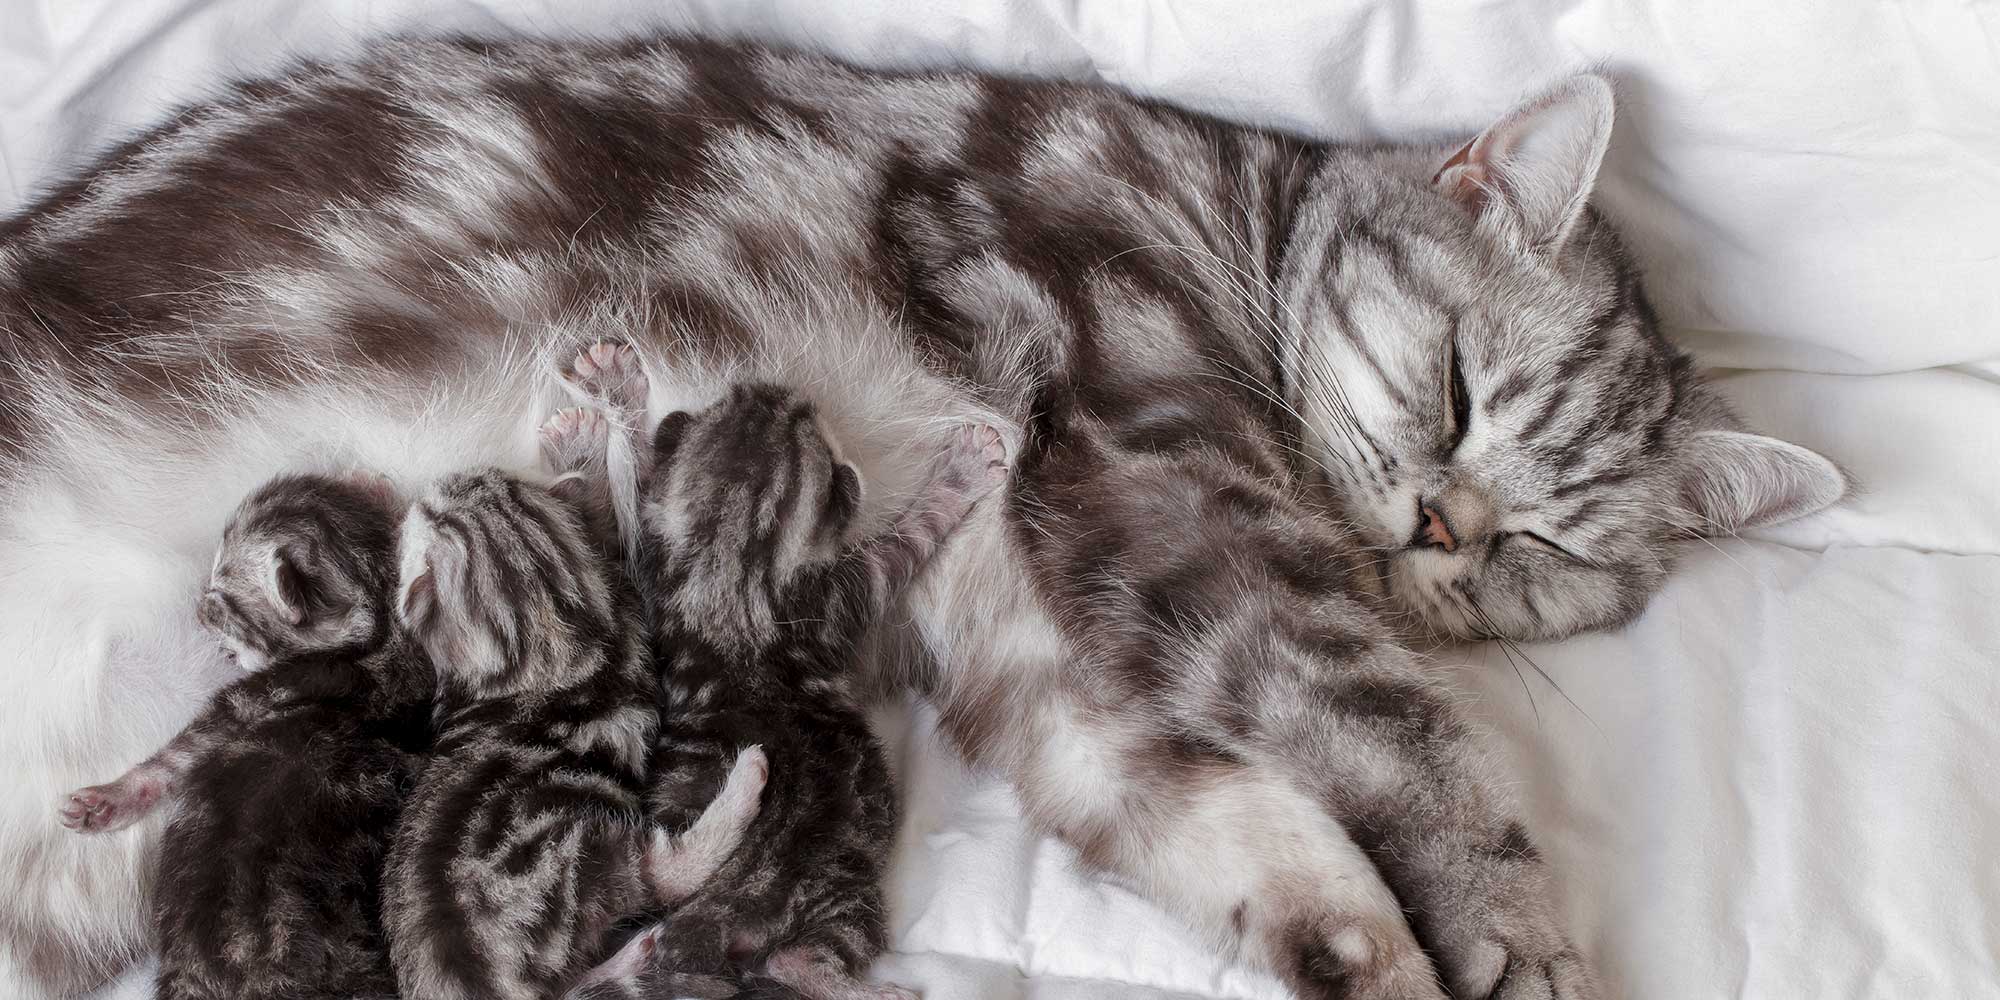 A tiger striped mama cat with her kittens